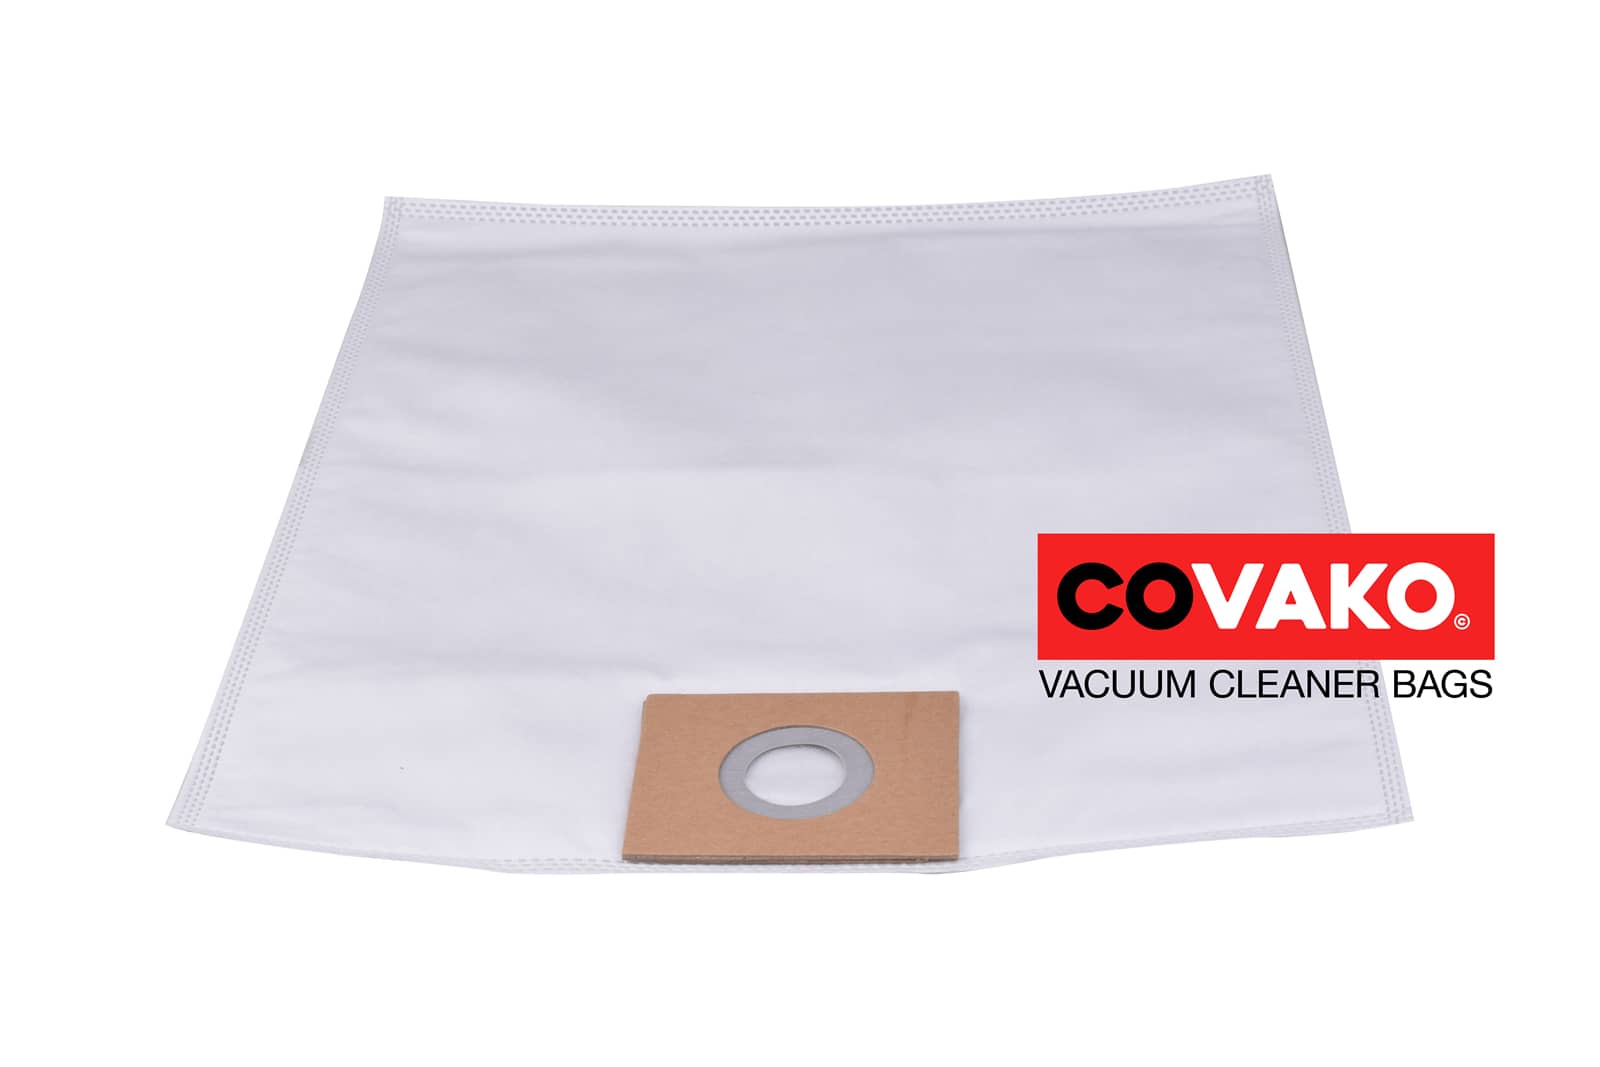 I-vac Dryver 15REH / Synthesis - I-vac vacuum cleaner bags